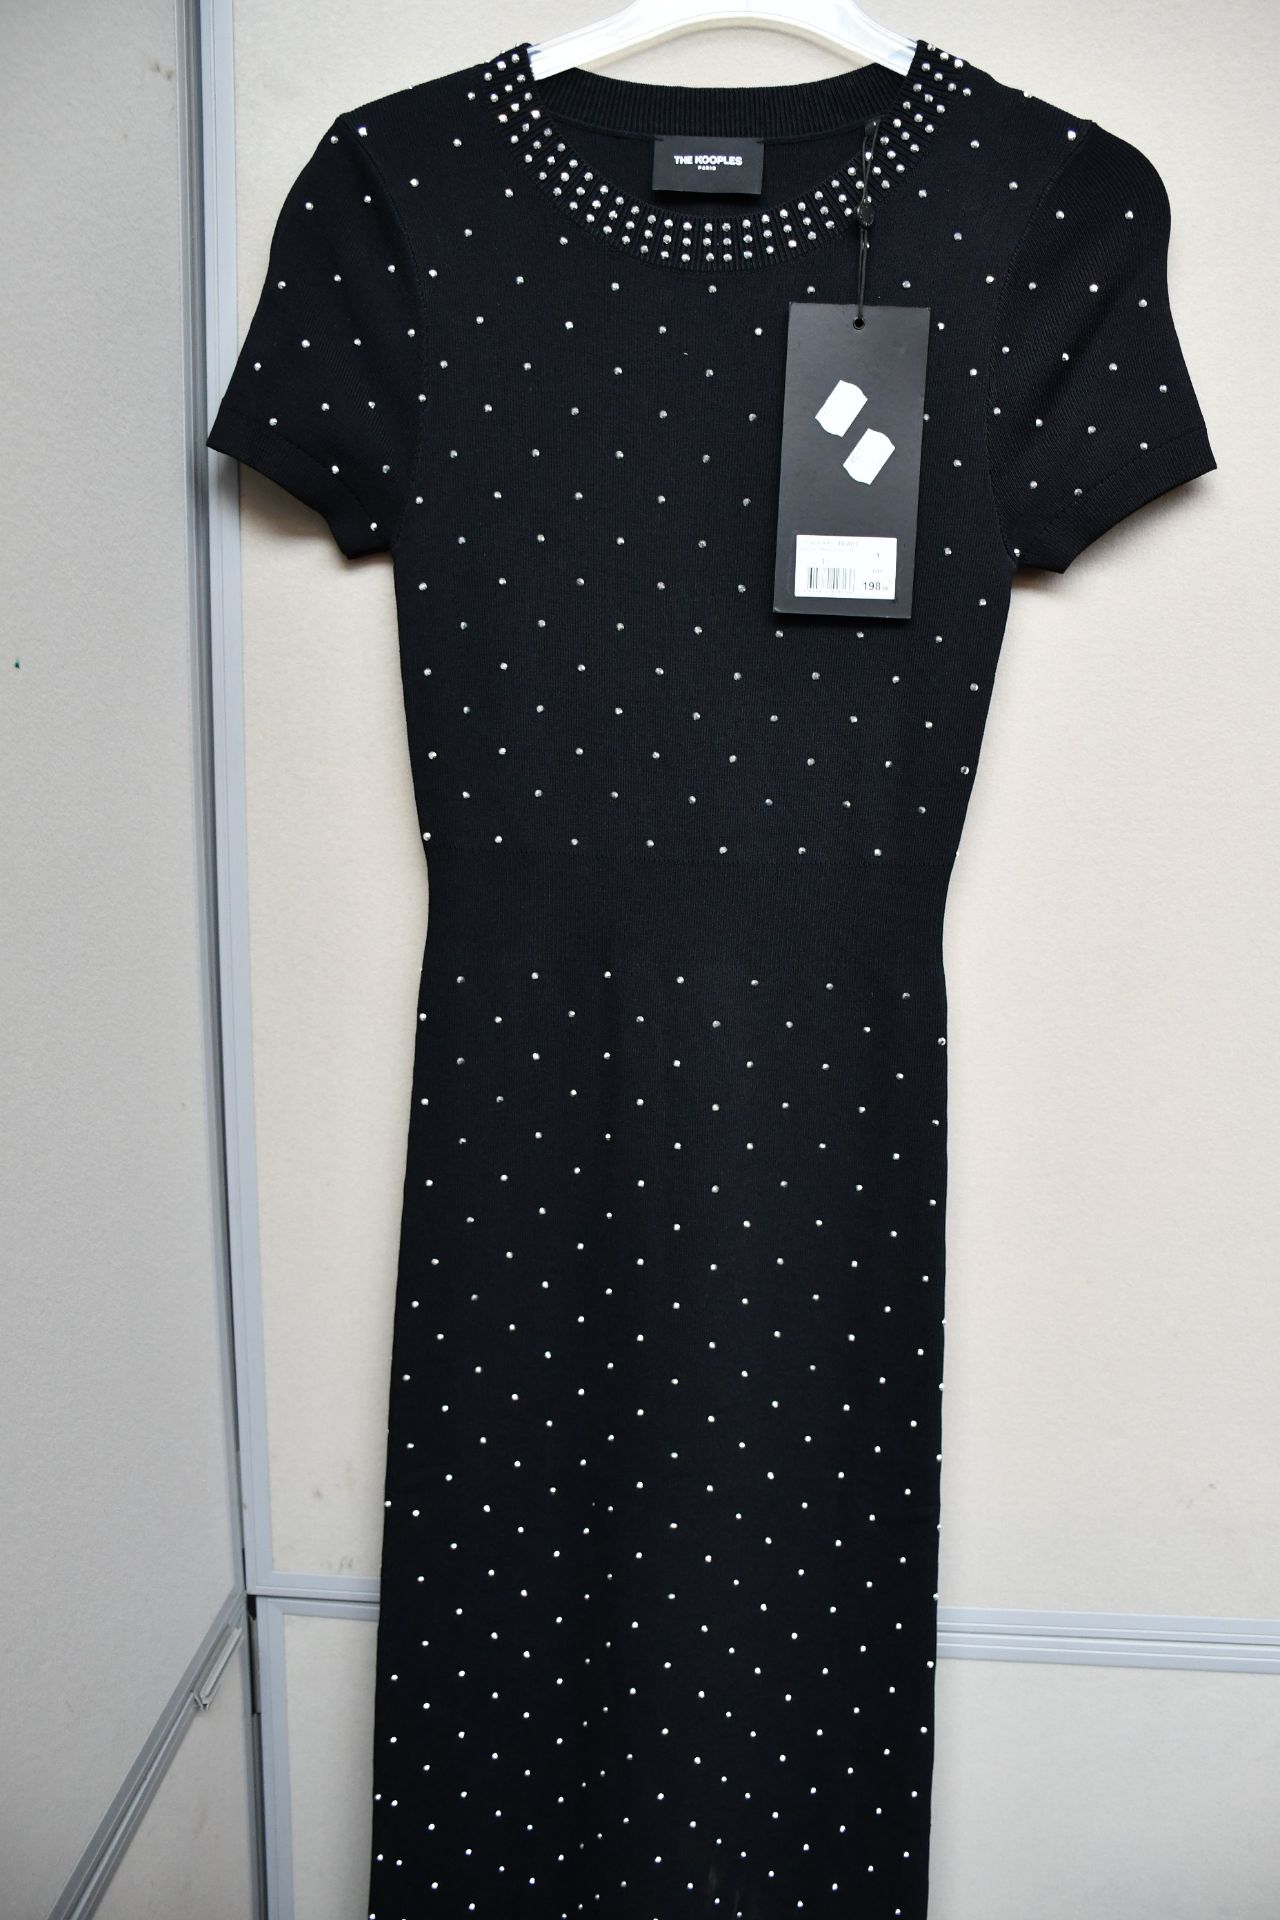 An as new The Kooples knitted studs line dress (Size 1 - RRP £198).